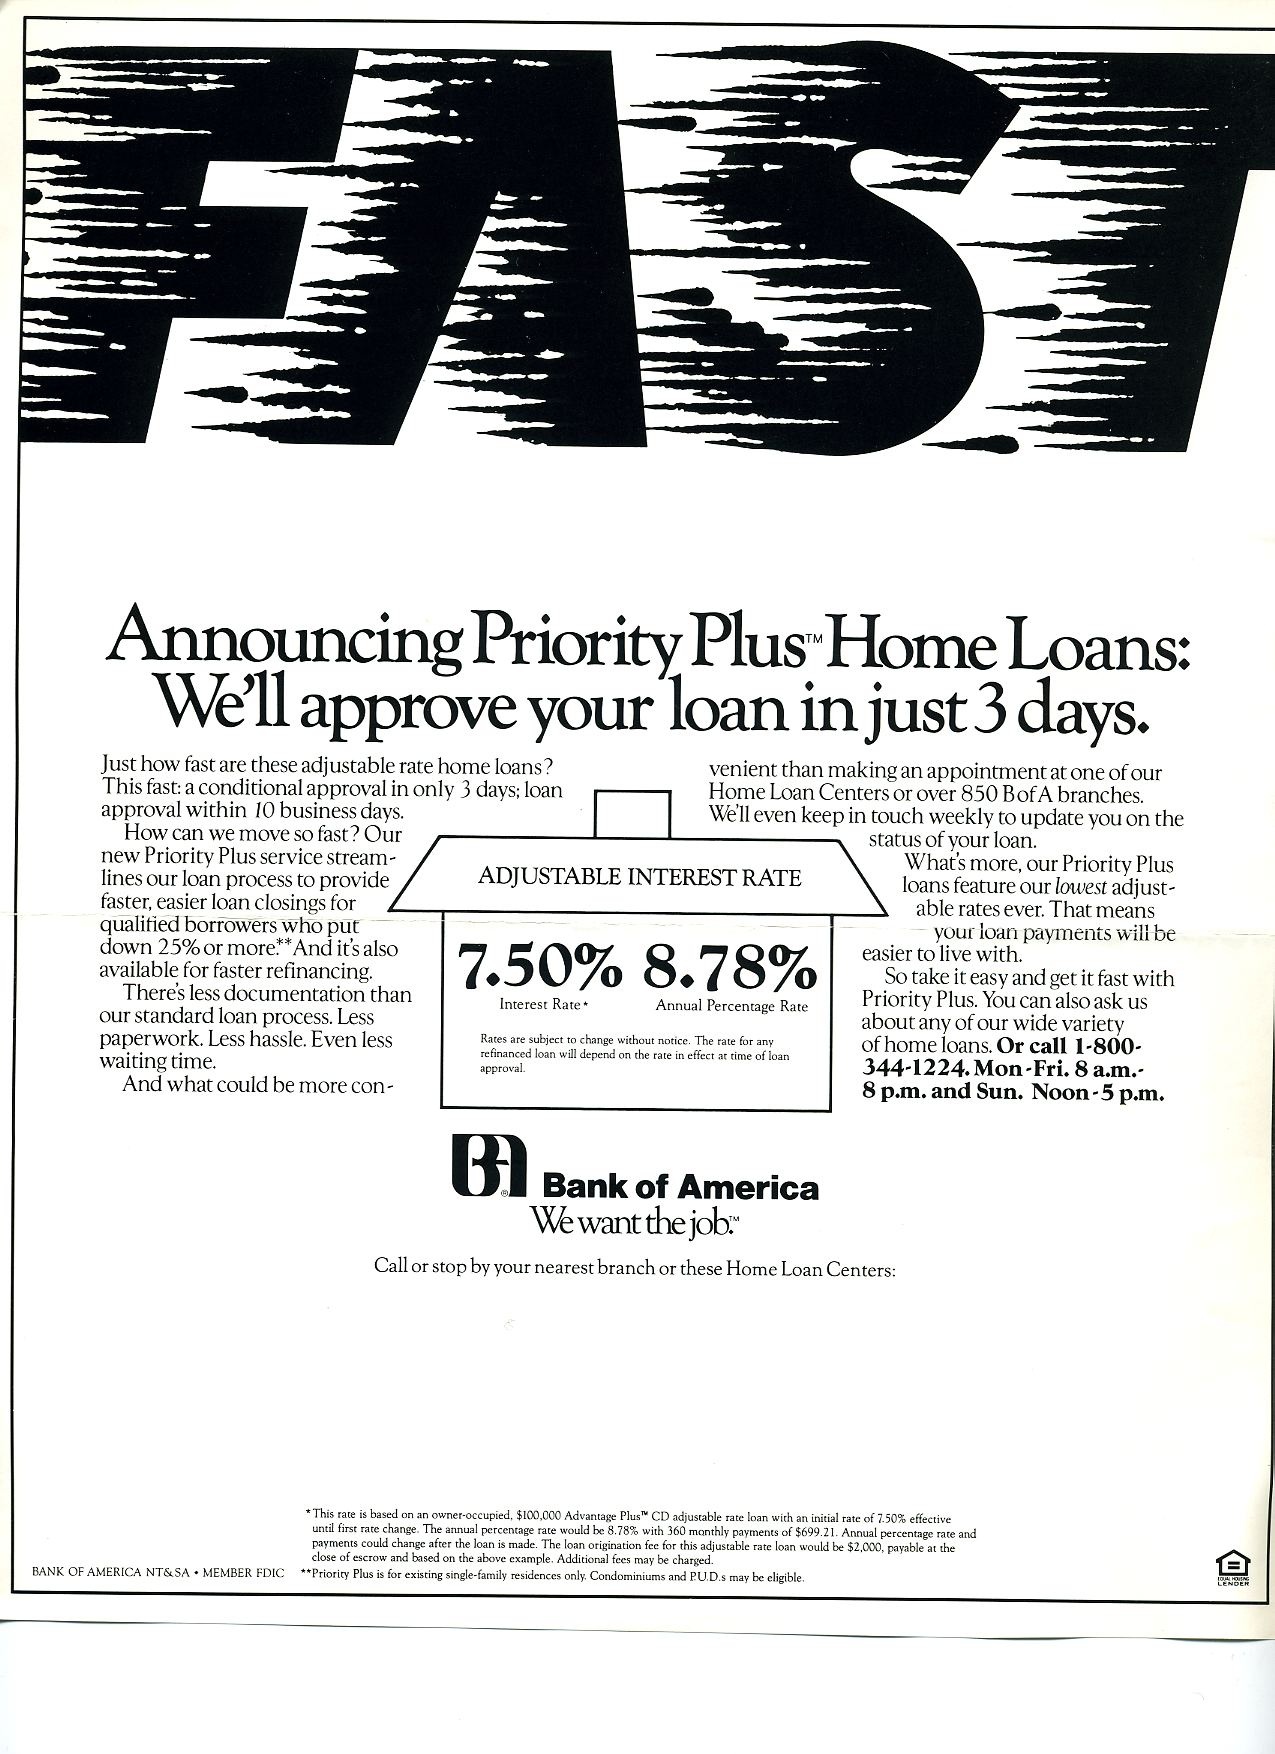 Home Equity Loans Rates Bank Of America